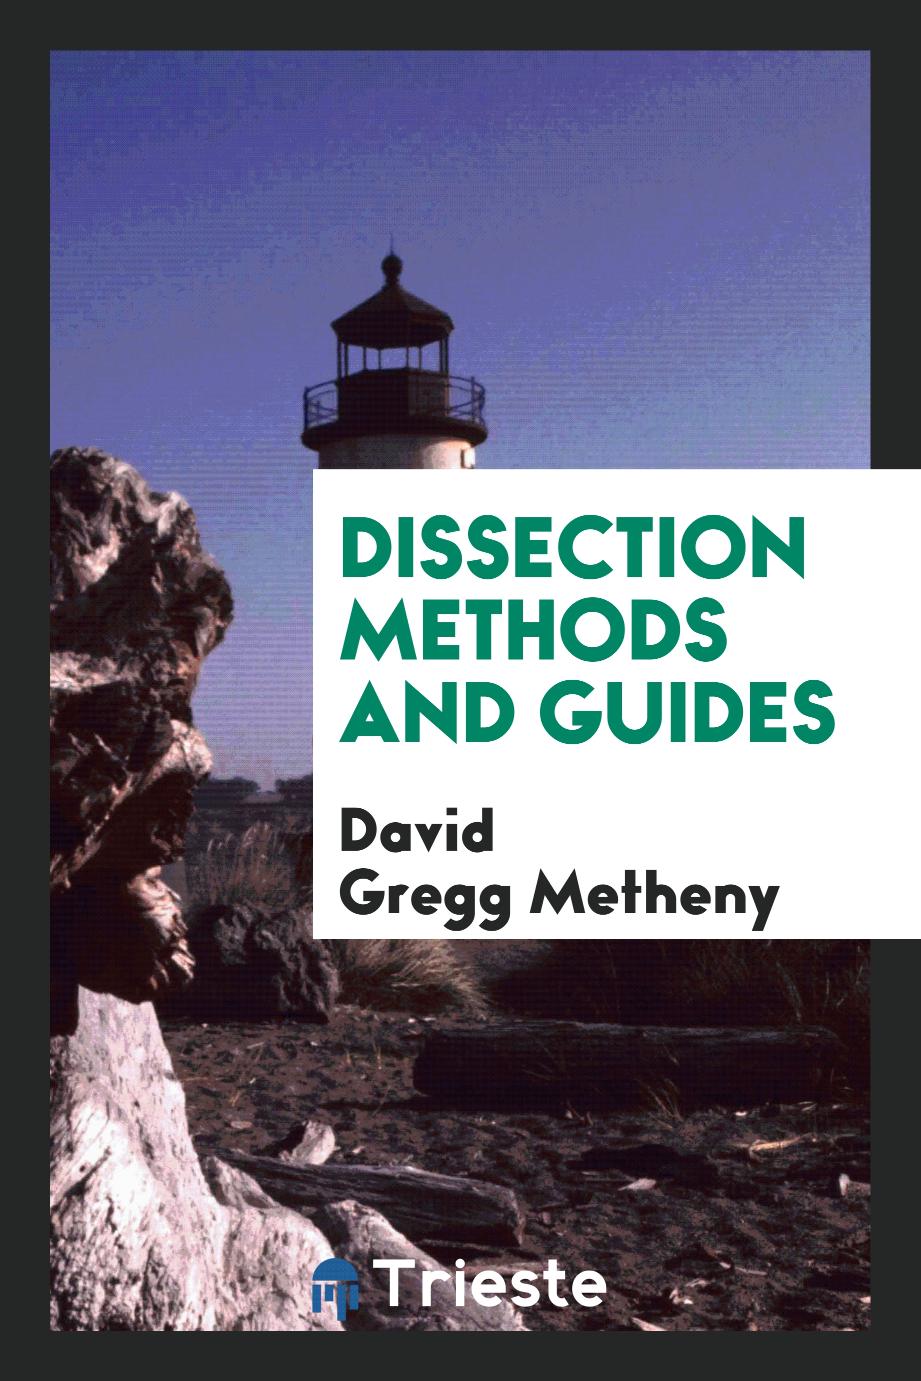 Dissection Methods and Guides